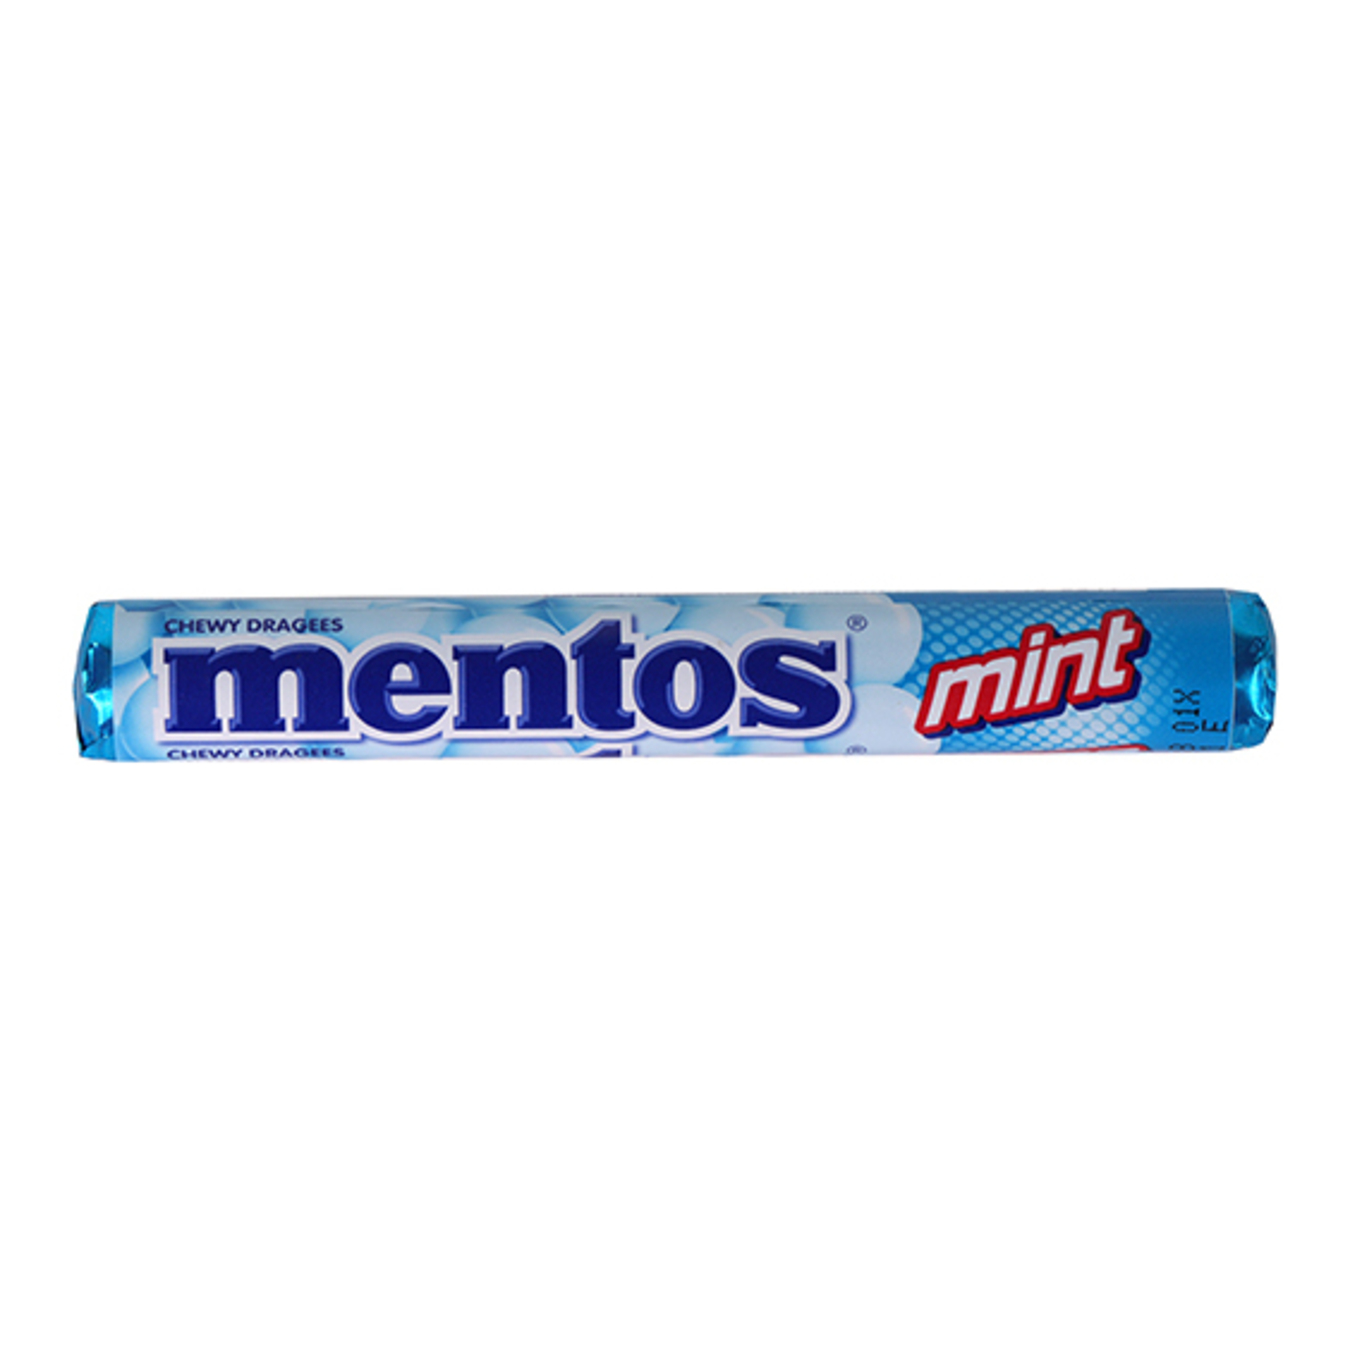 Mentos Menthol chewing dragee 38g